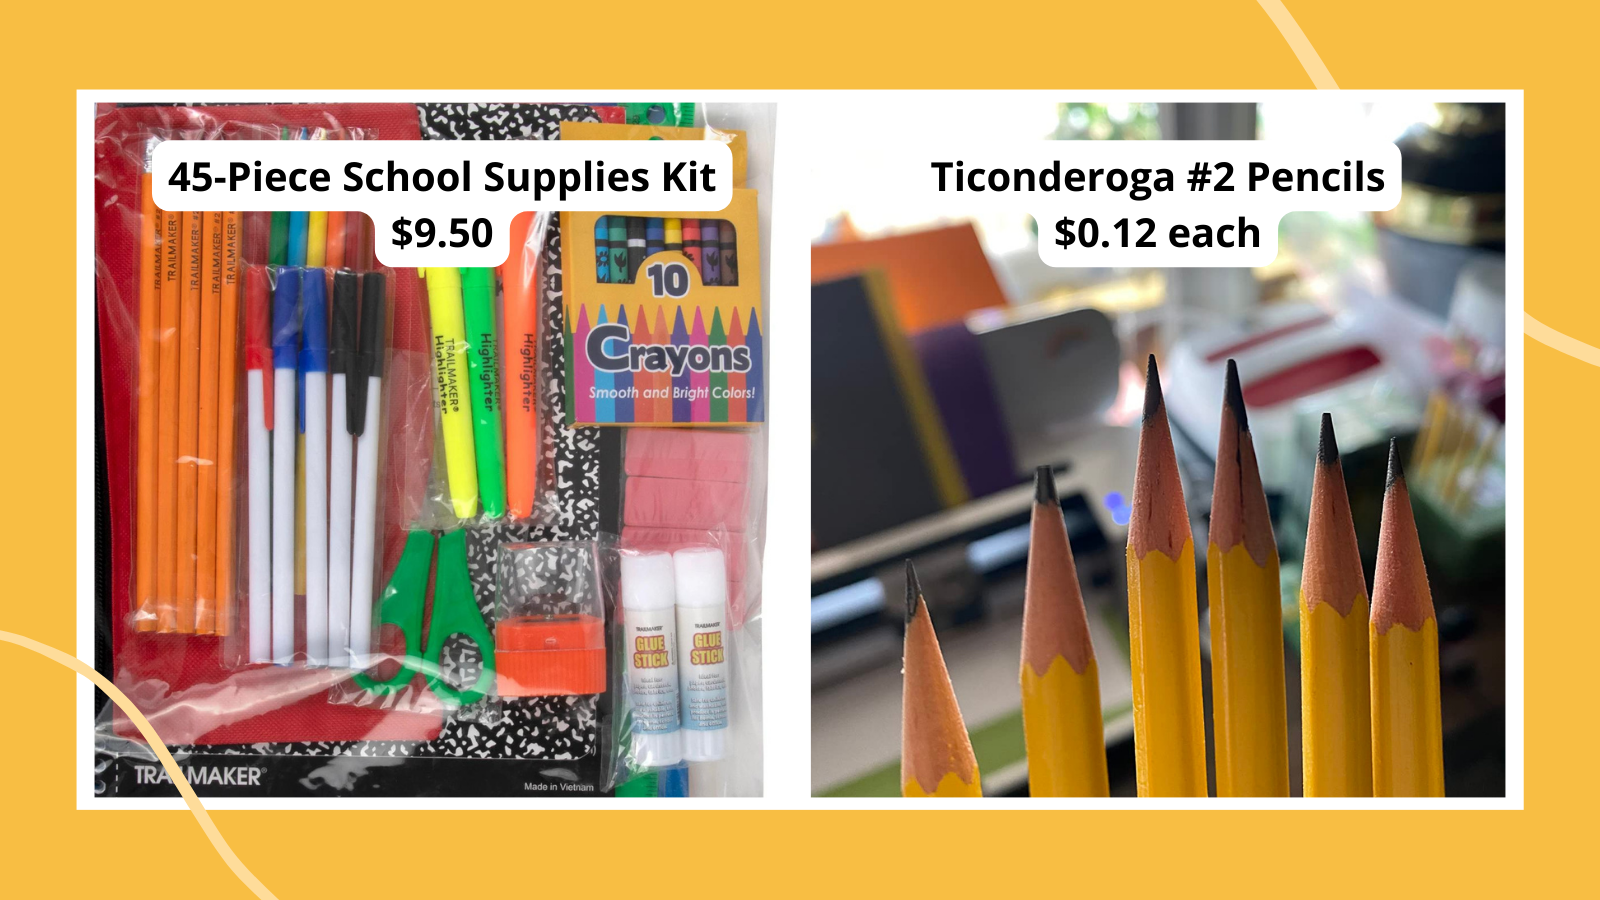 Examples of discount school supplies including a 45-piece kit for $9.50 and Ticonderoga #2 pencils for $0.12 each.